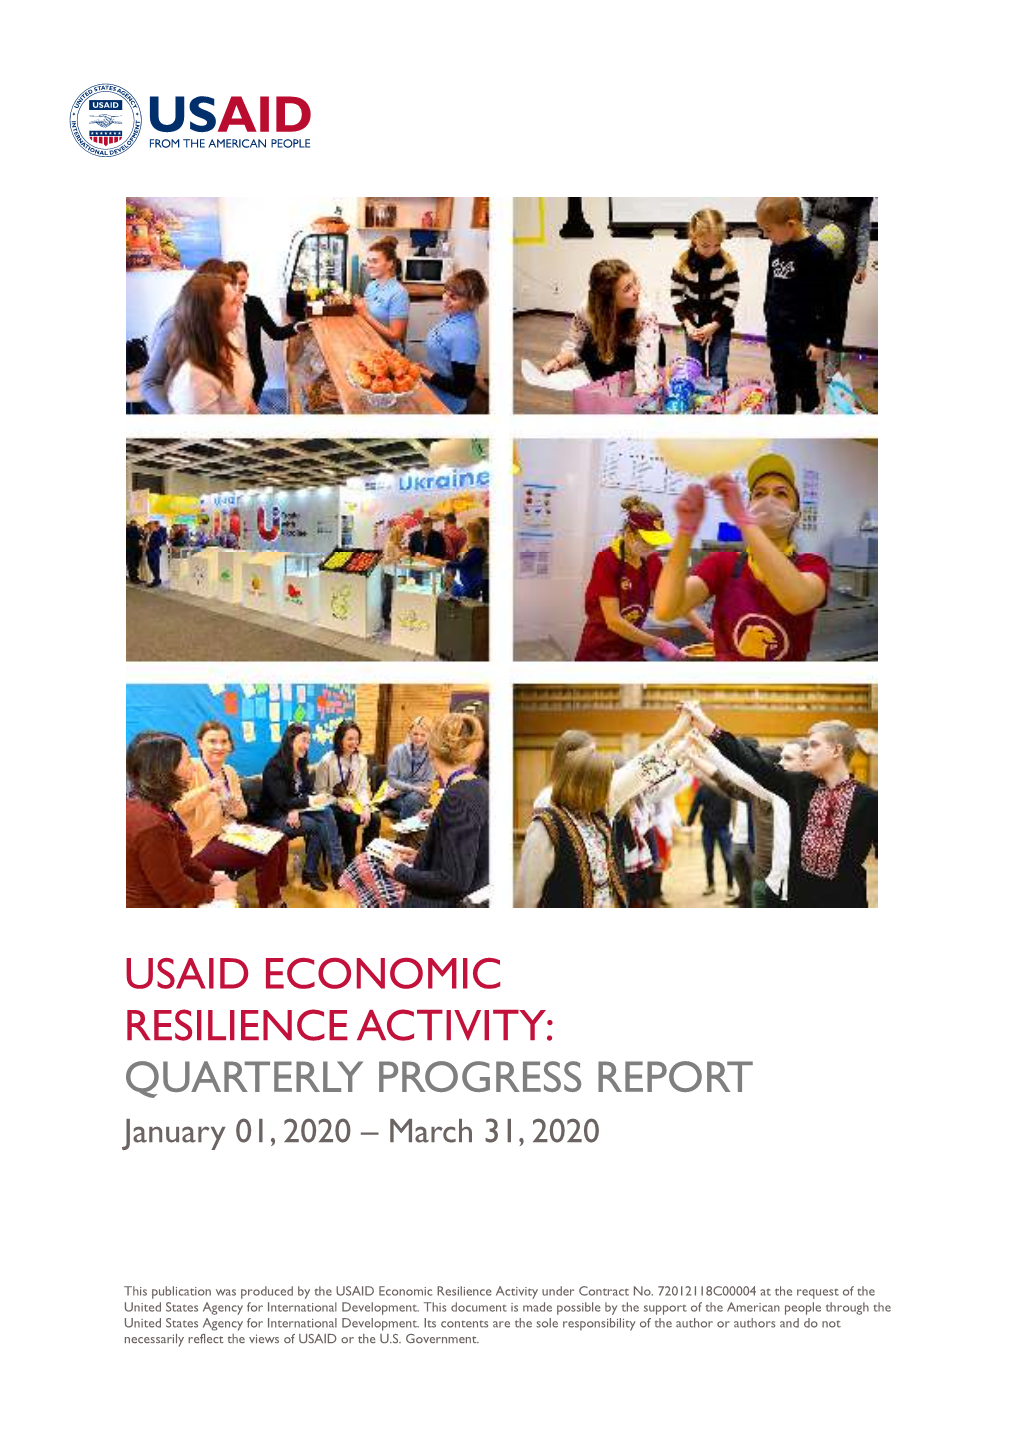 USAID ECONOMIC RESILIENCE ACTIVITY: QUARTERLY PROGRESS REPORT January 01, 2020 – March 31, 2020